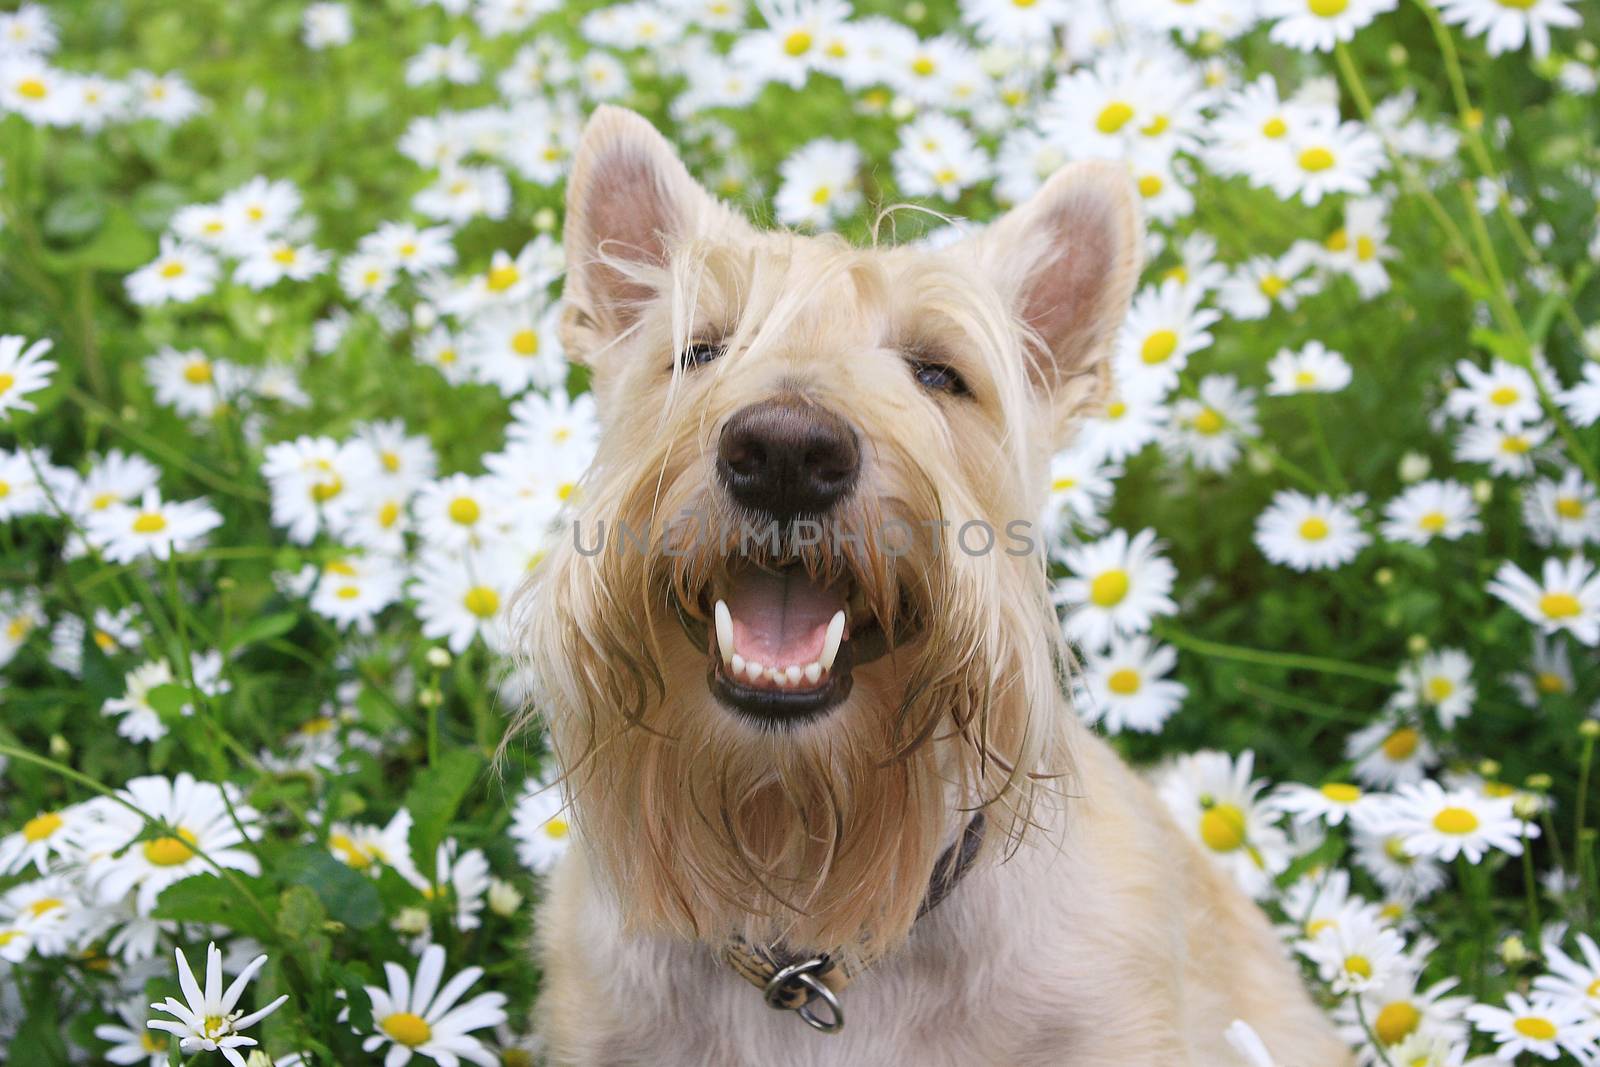 Smiling Wheaten Scottish Terrier portrait in chamomile flowers i by cococinema